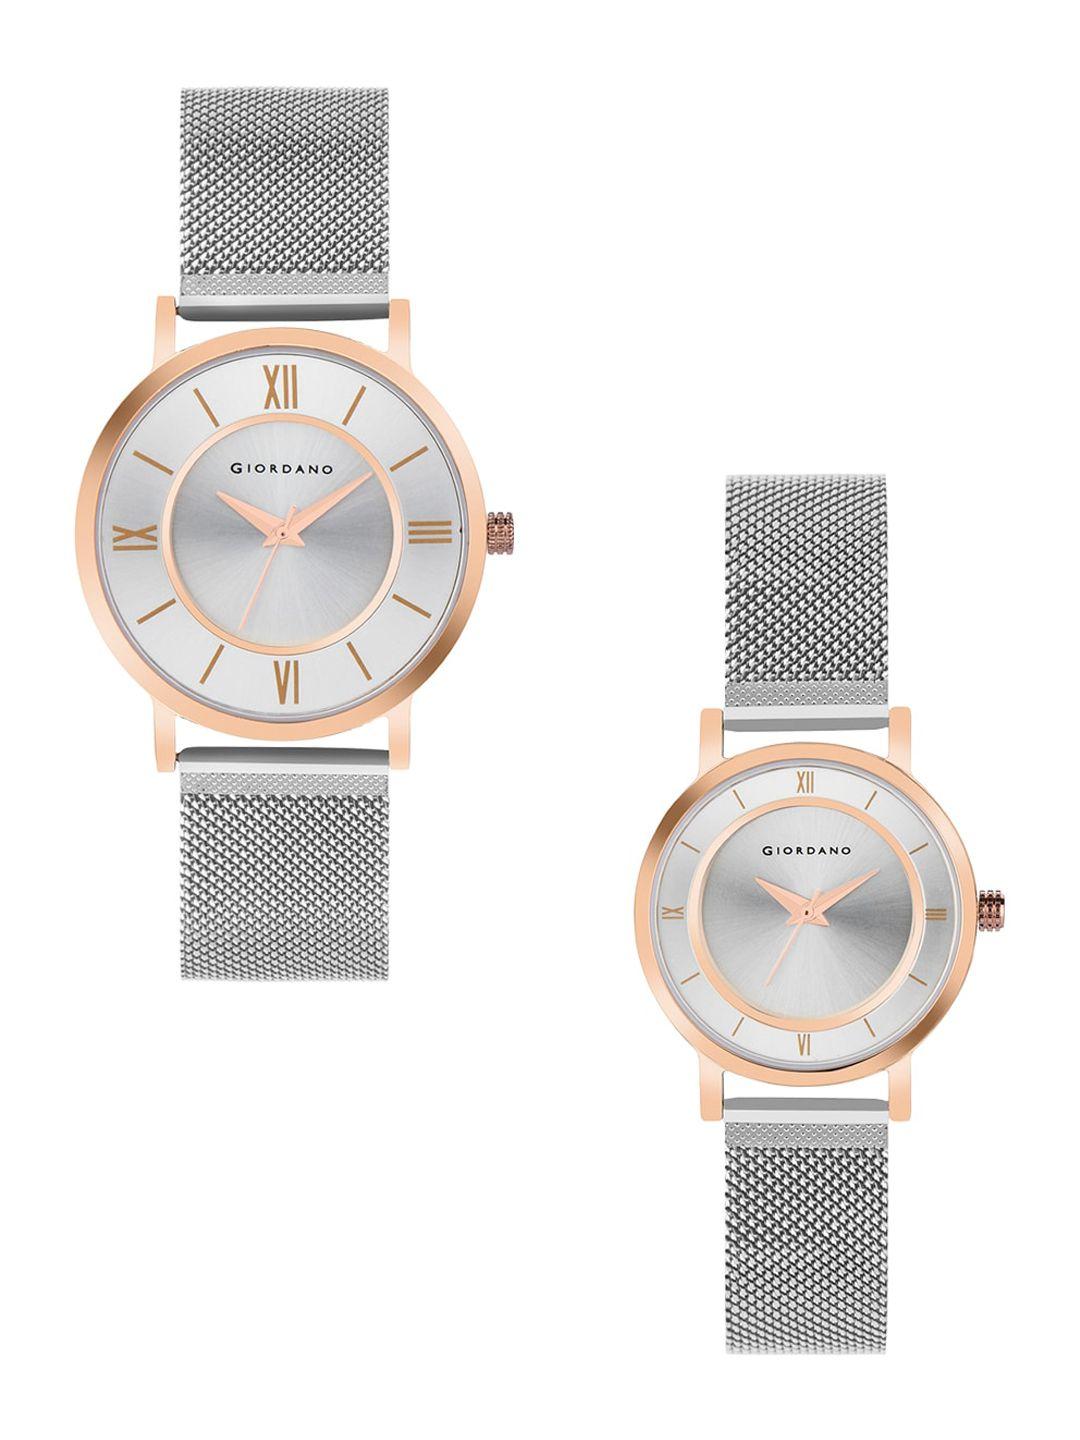 giordano pack-2  silver-toned dial bracelet style straps analogue watch gift set   gd-1172-seta-77